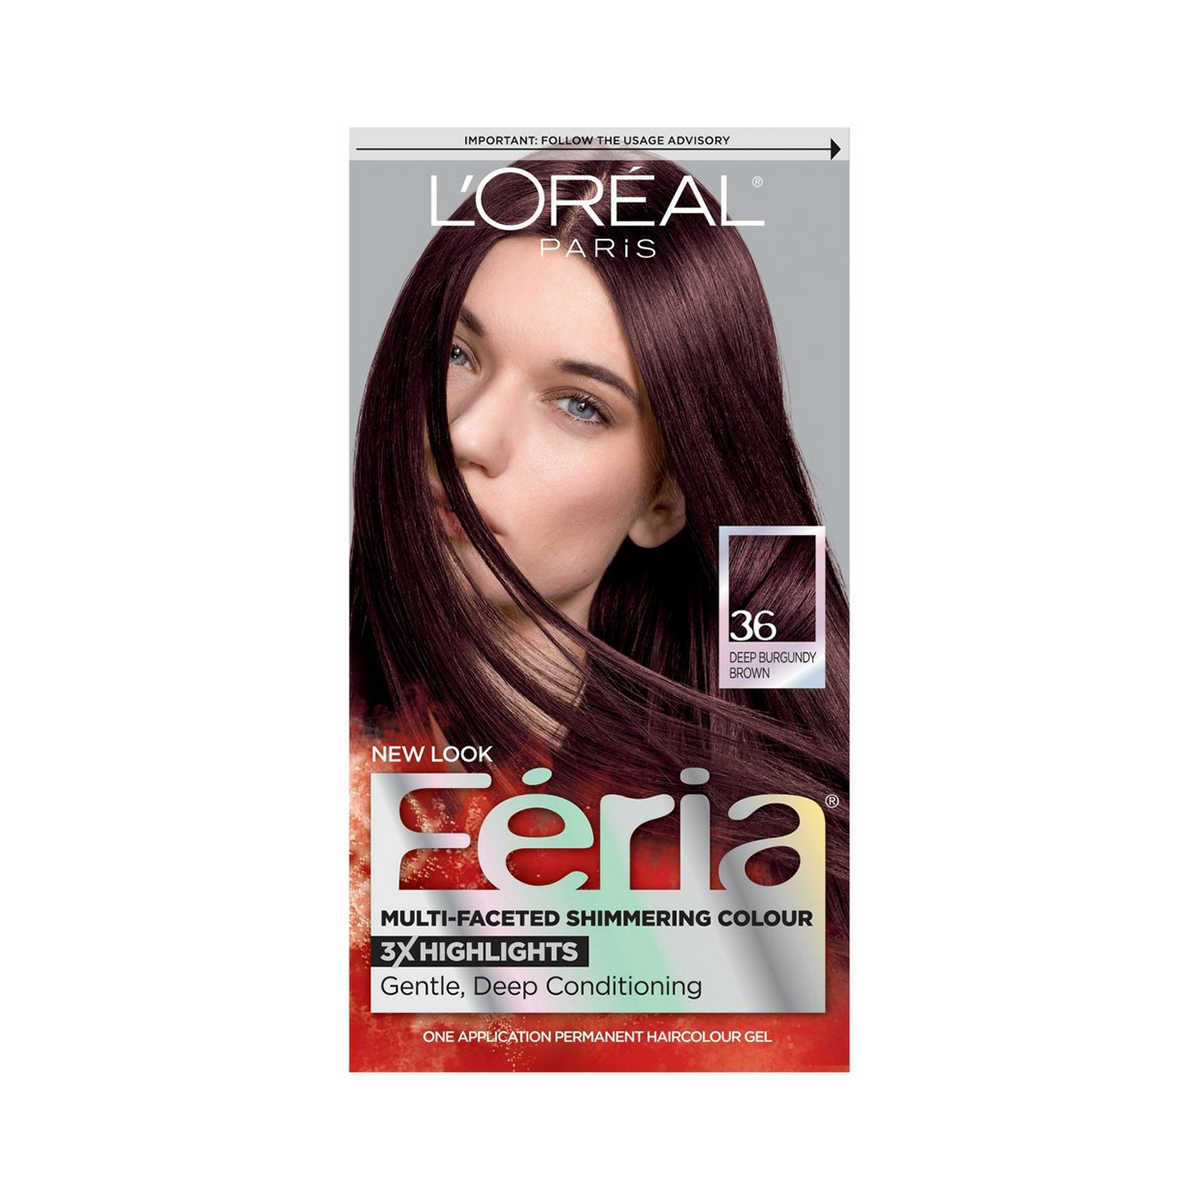 LOreal Feria Multi Faceted Shimmering Hair Color 36 Deep Burgundy